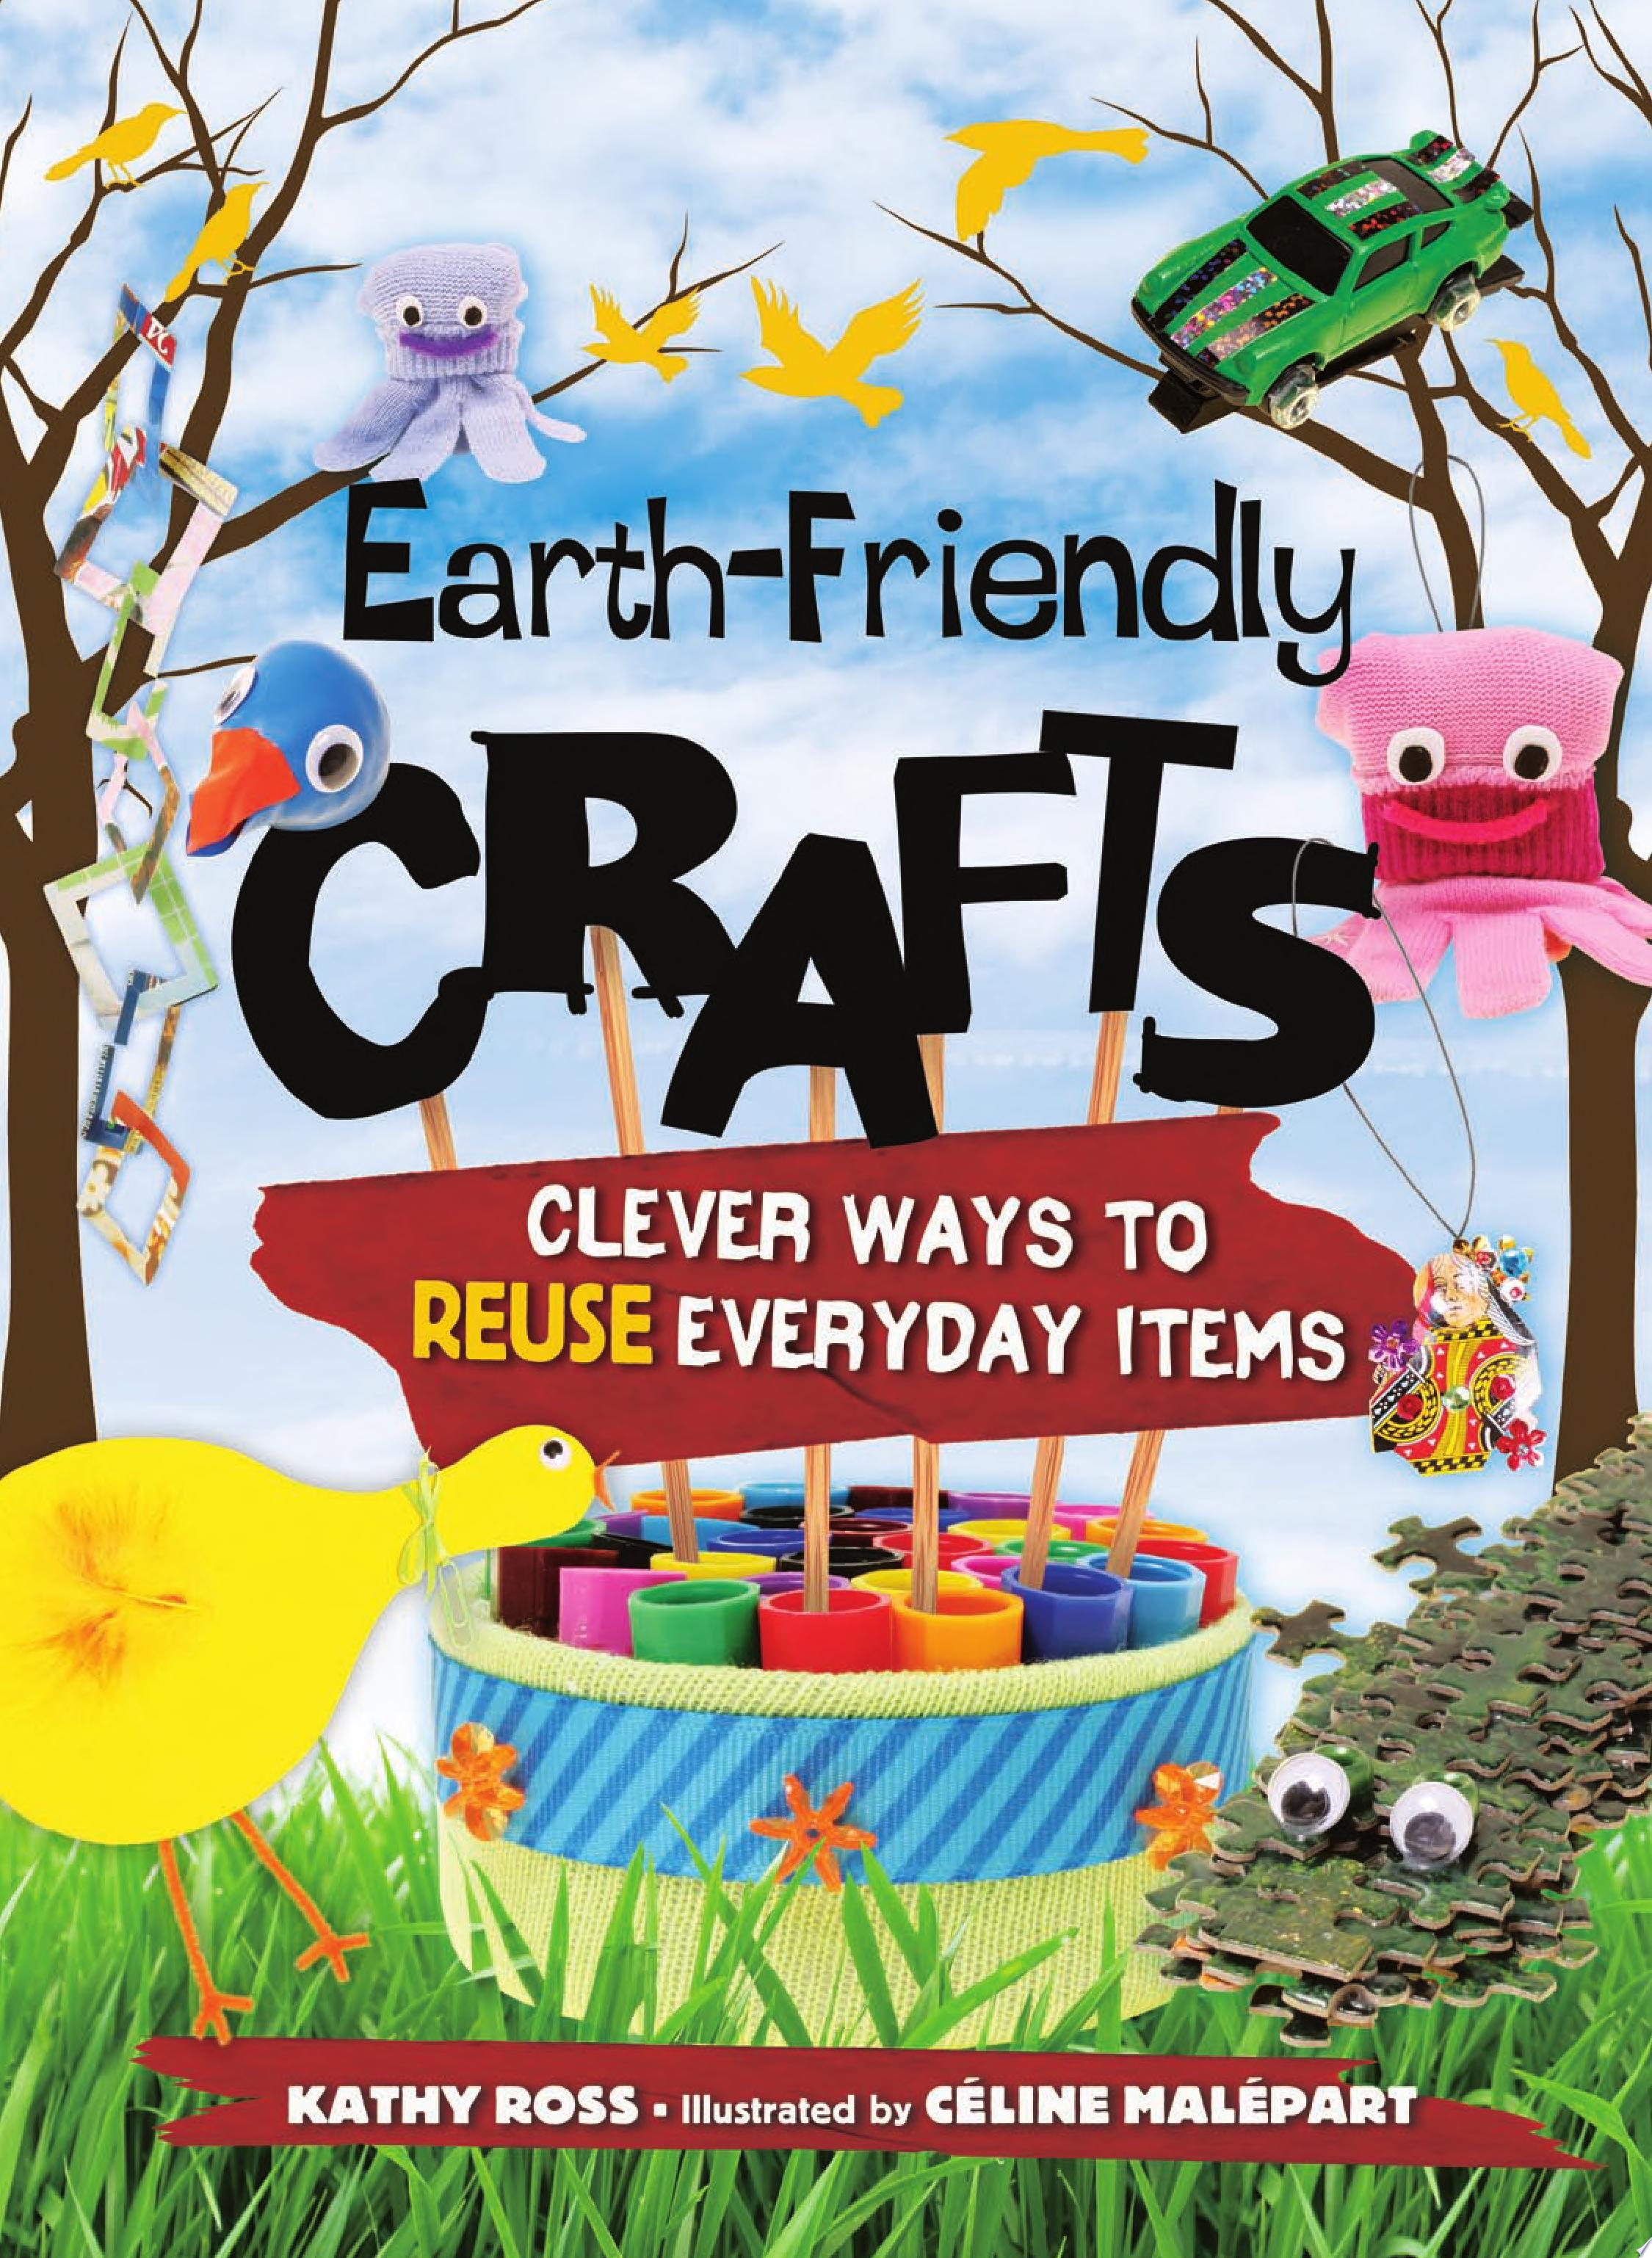 Image for "Earth-Friendly Crafts: clever ways to reuse everyday items"